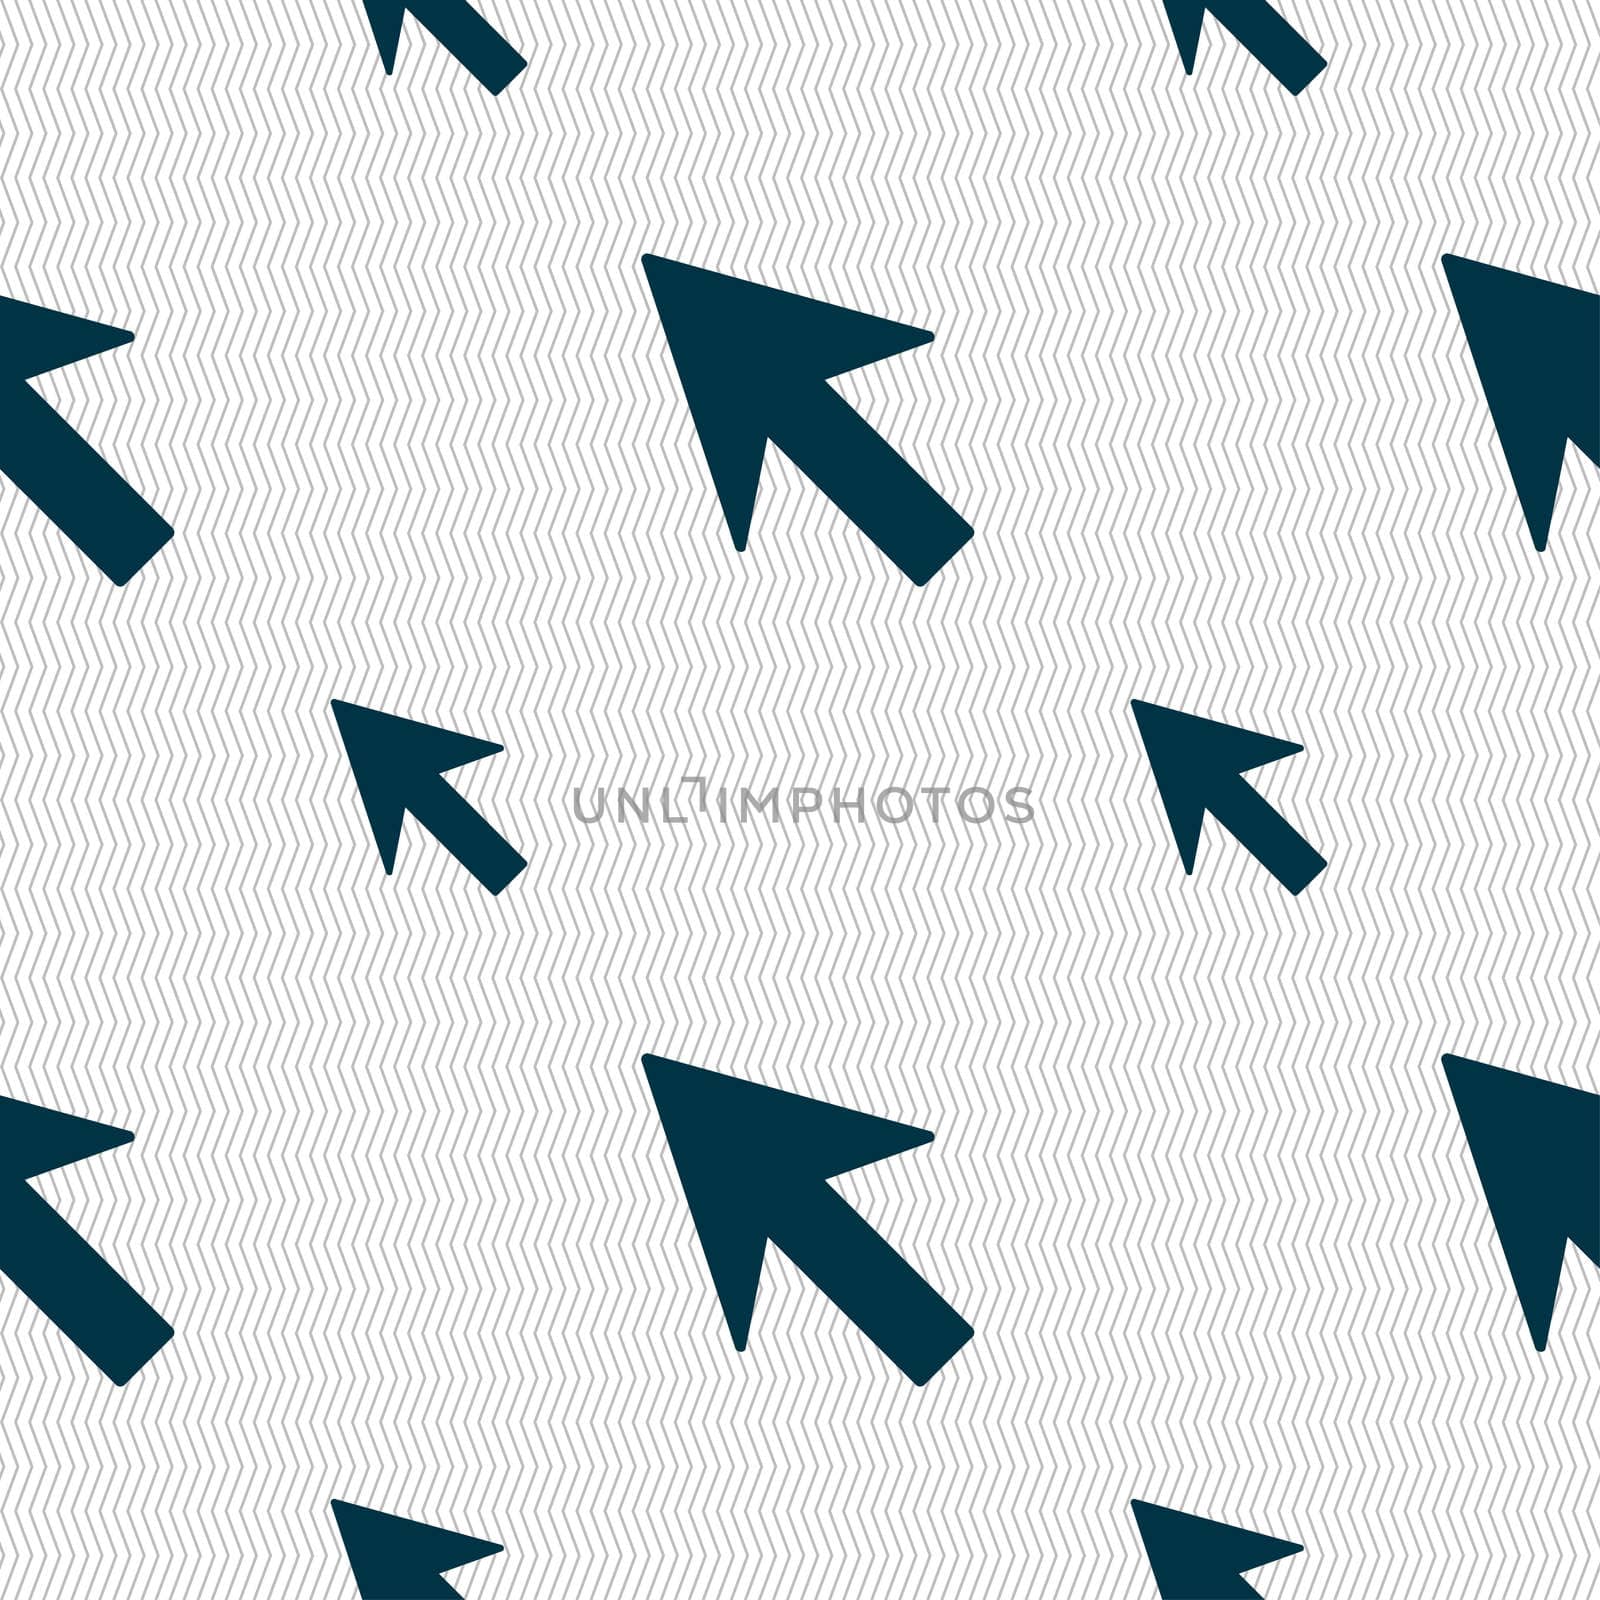 Cursor, arrow icon sign. Seamless pattern with geometric texture. illustration